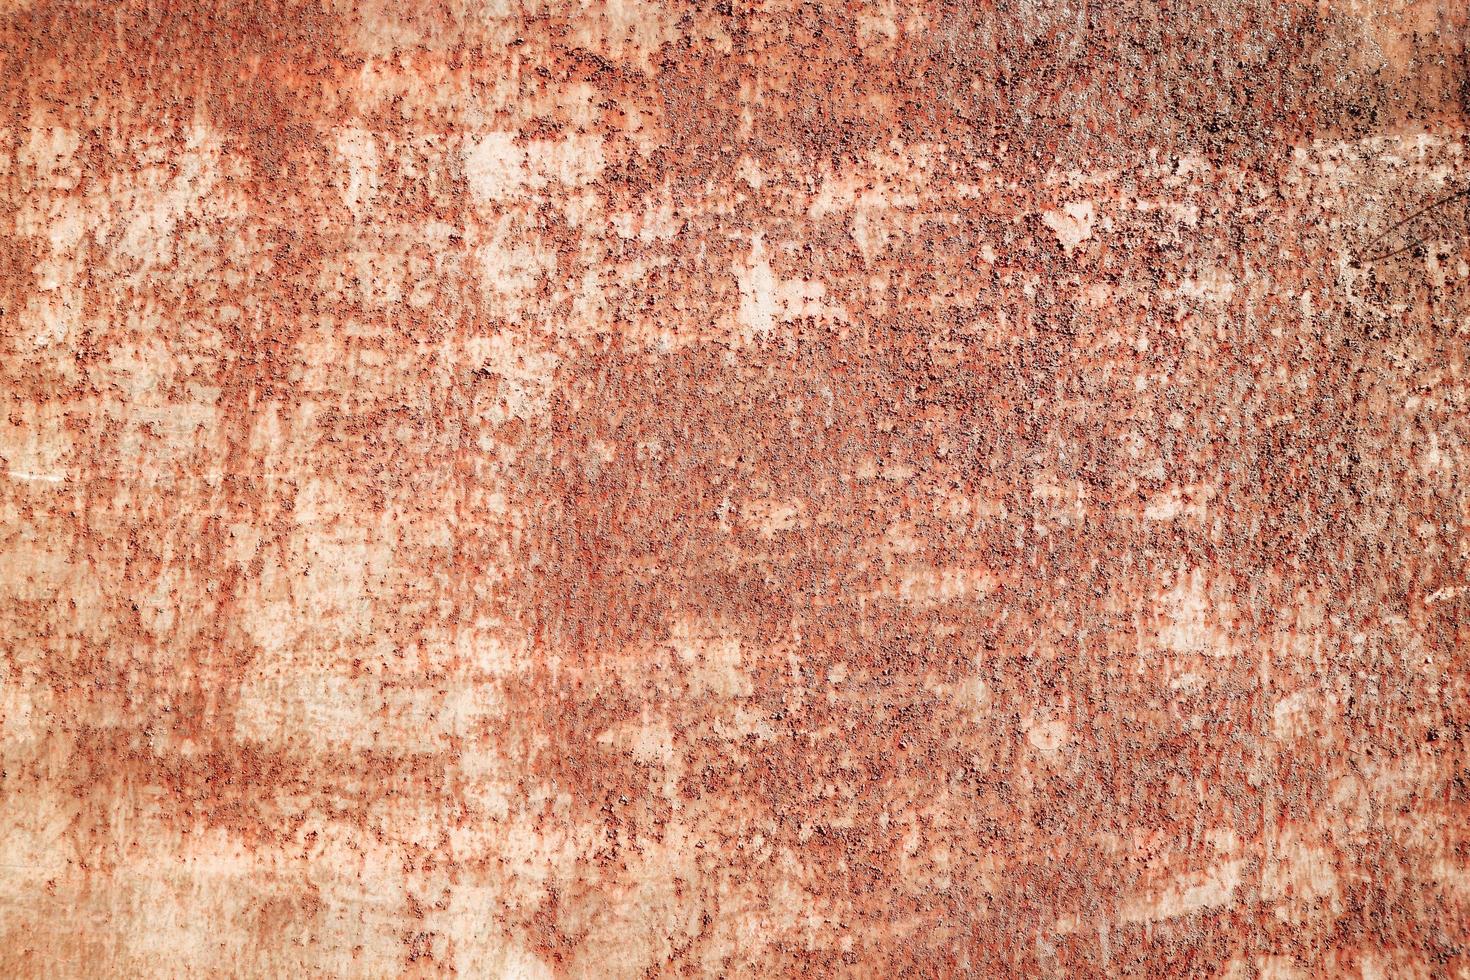 Grunge rusty metal texture. Rusted and oxidized background. photo